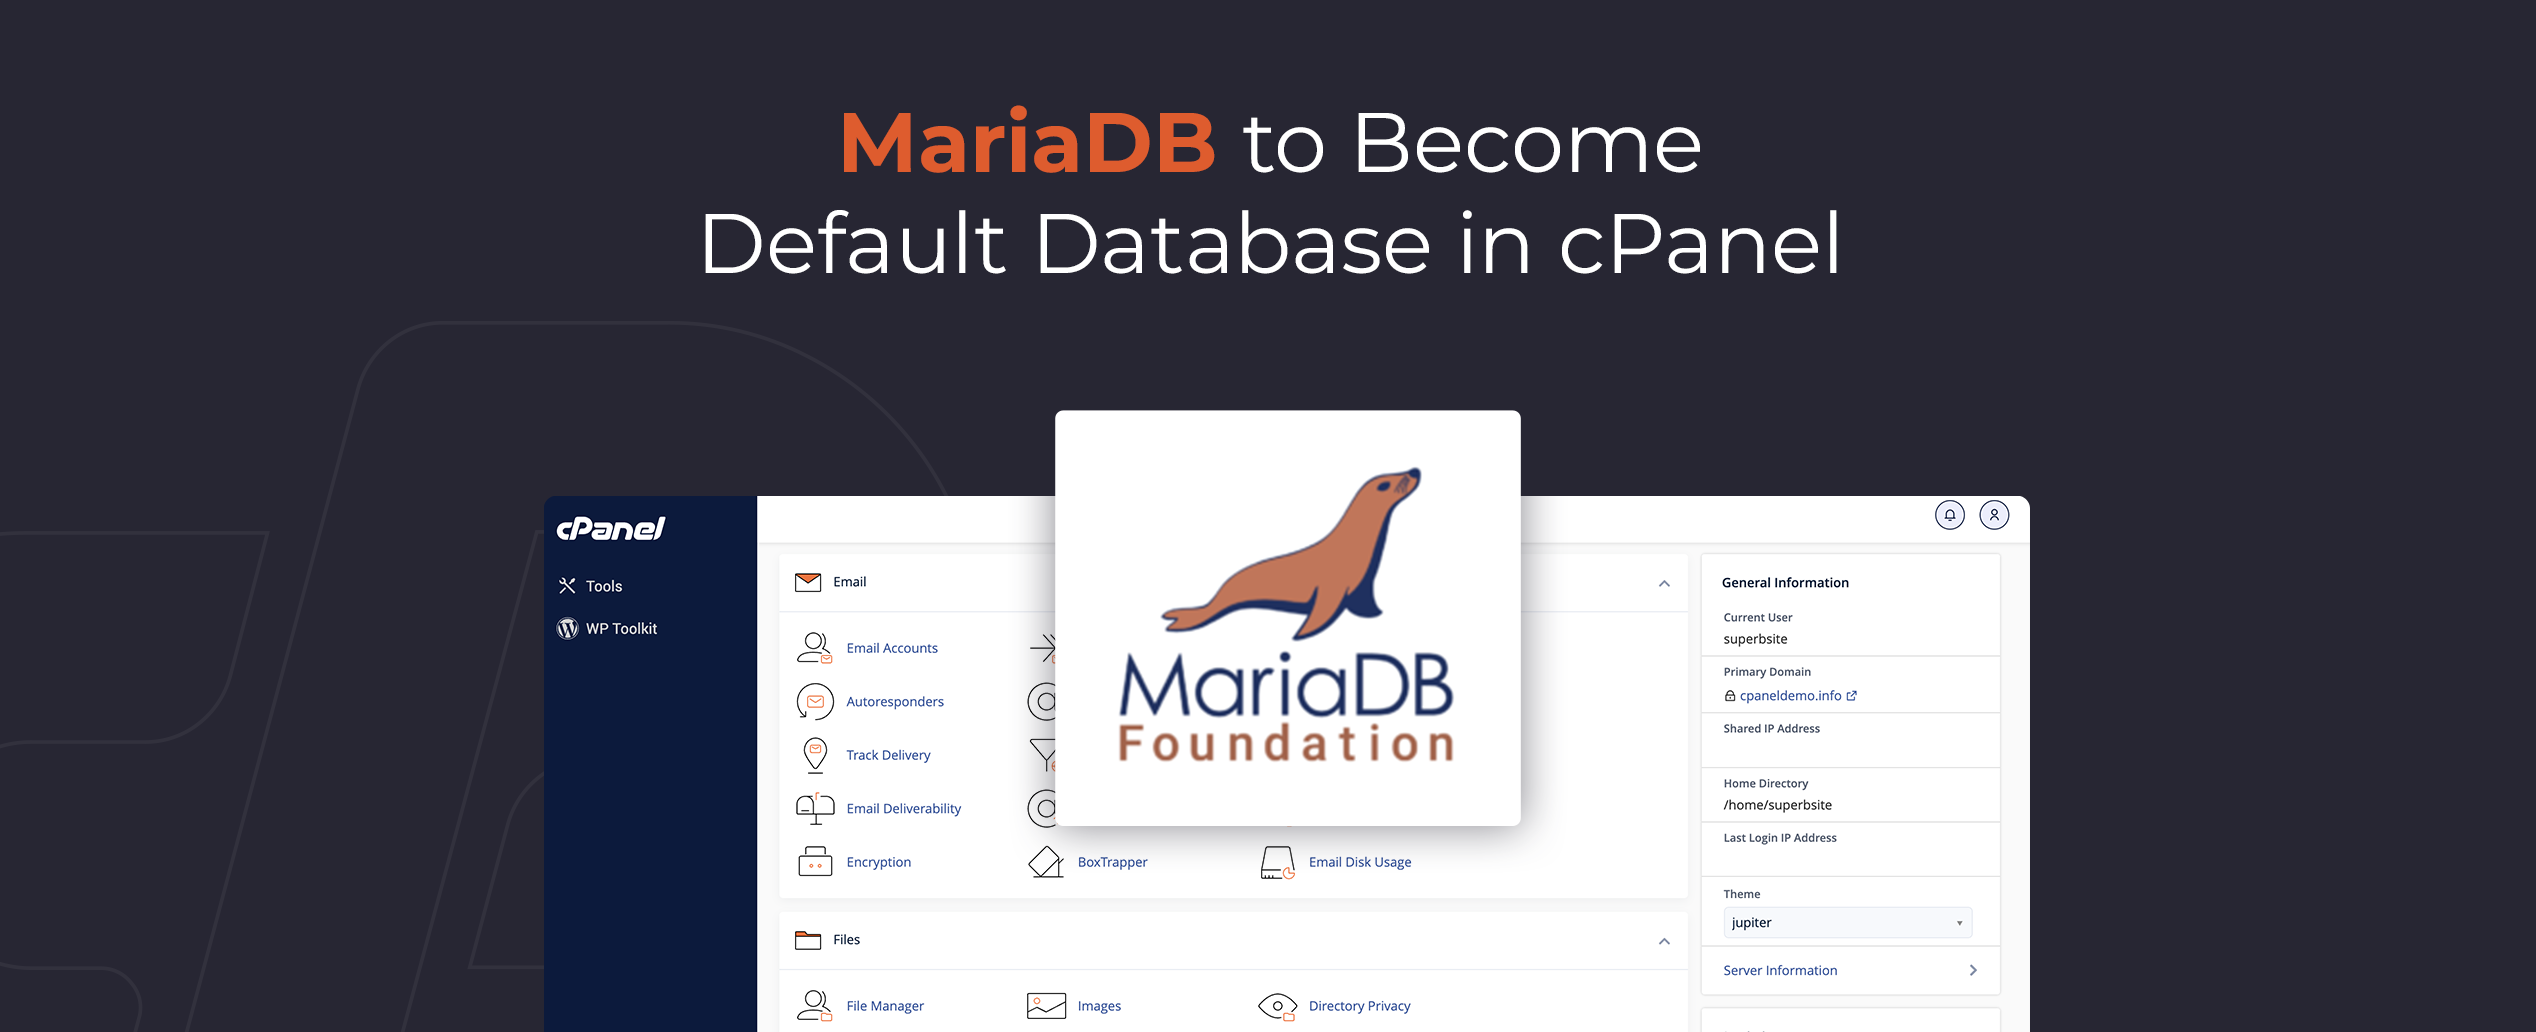 MariaDB Server to Become Default Database in cPanel